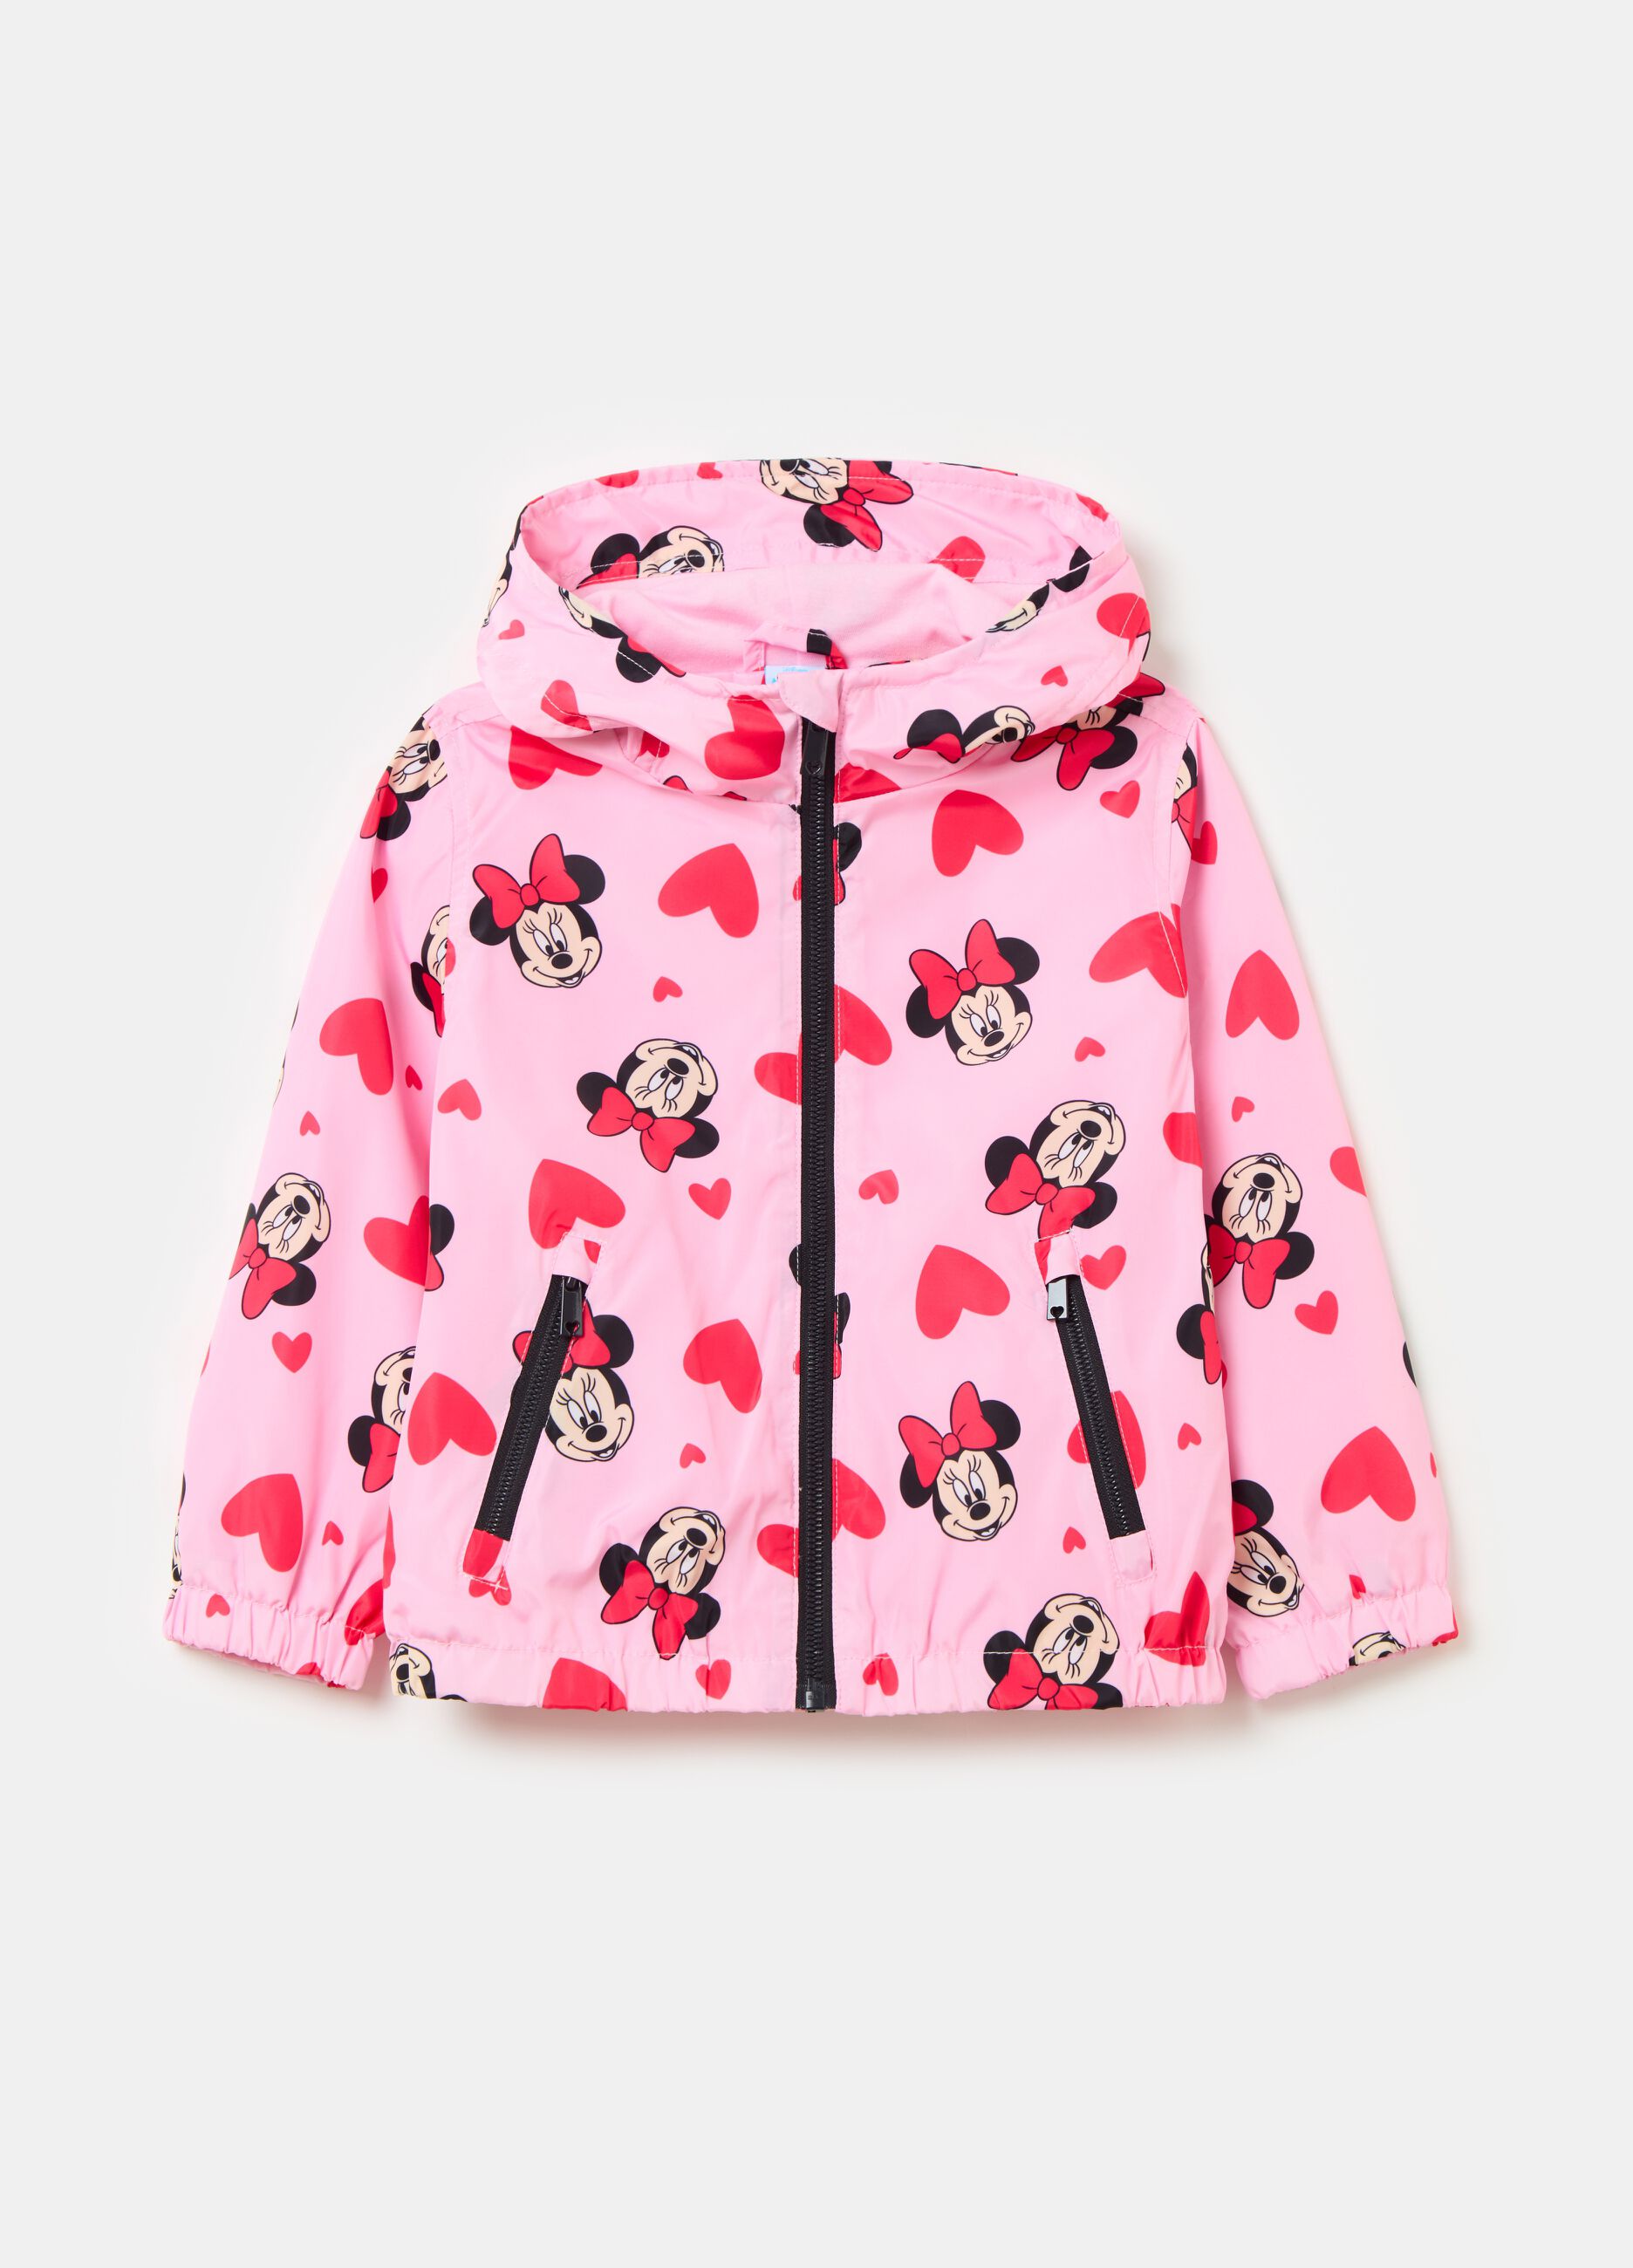 Waterproof jacket with Minnie Mouse print